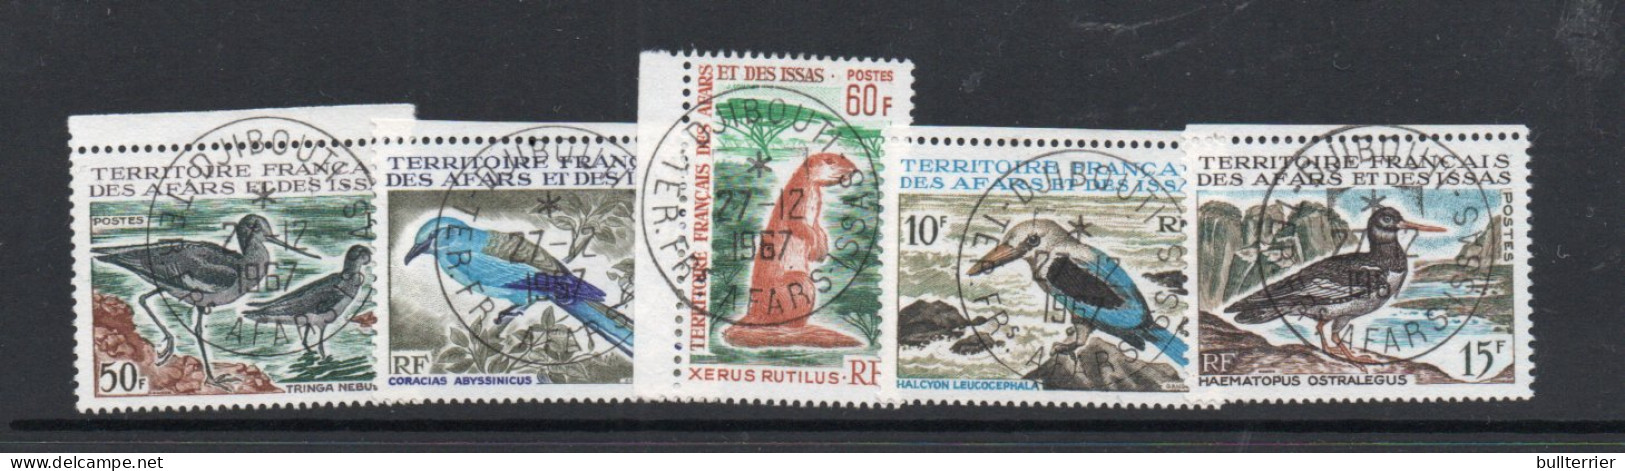 AFARS & ISSAS -  1967 - FAUNA  POSTAGE SET OF 5 FINE USED  SG CAT £115 - Used Stamps